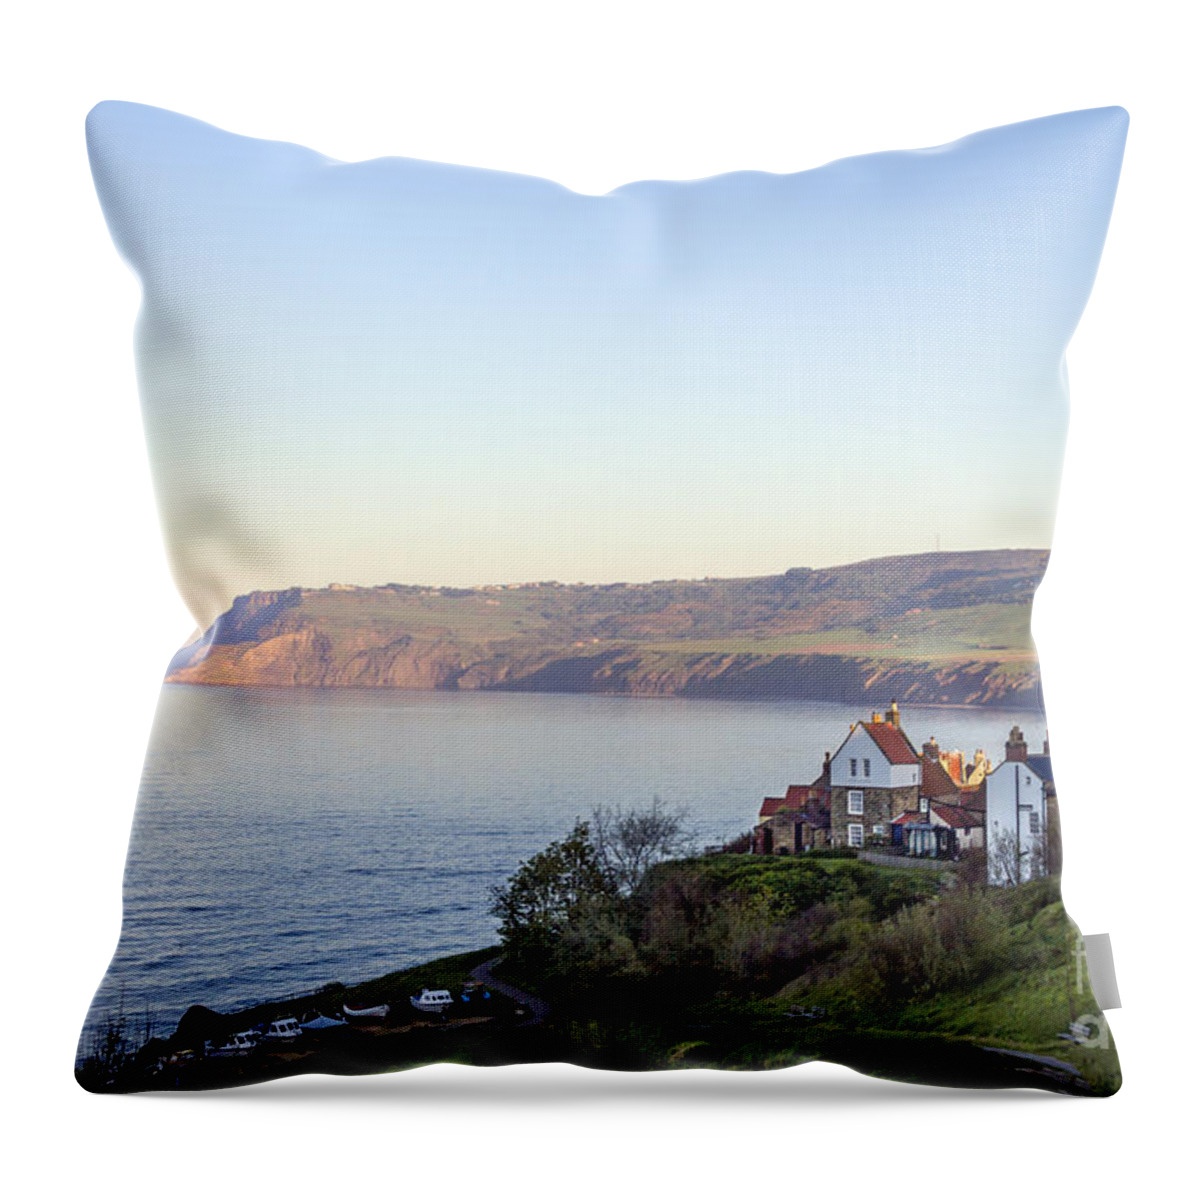 Robin Hood's Bay Throw Pillow featuring the photograph Dream In The Boundary Waters by Evelina Kremsdorf